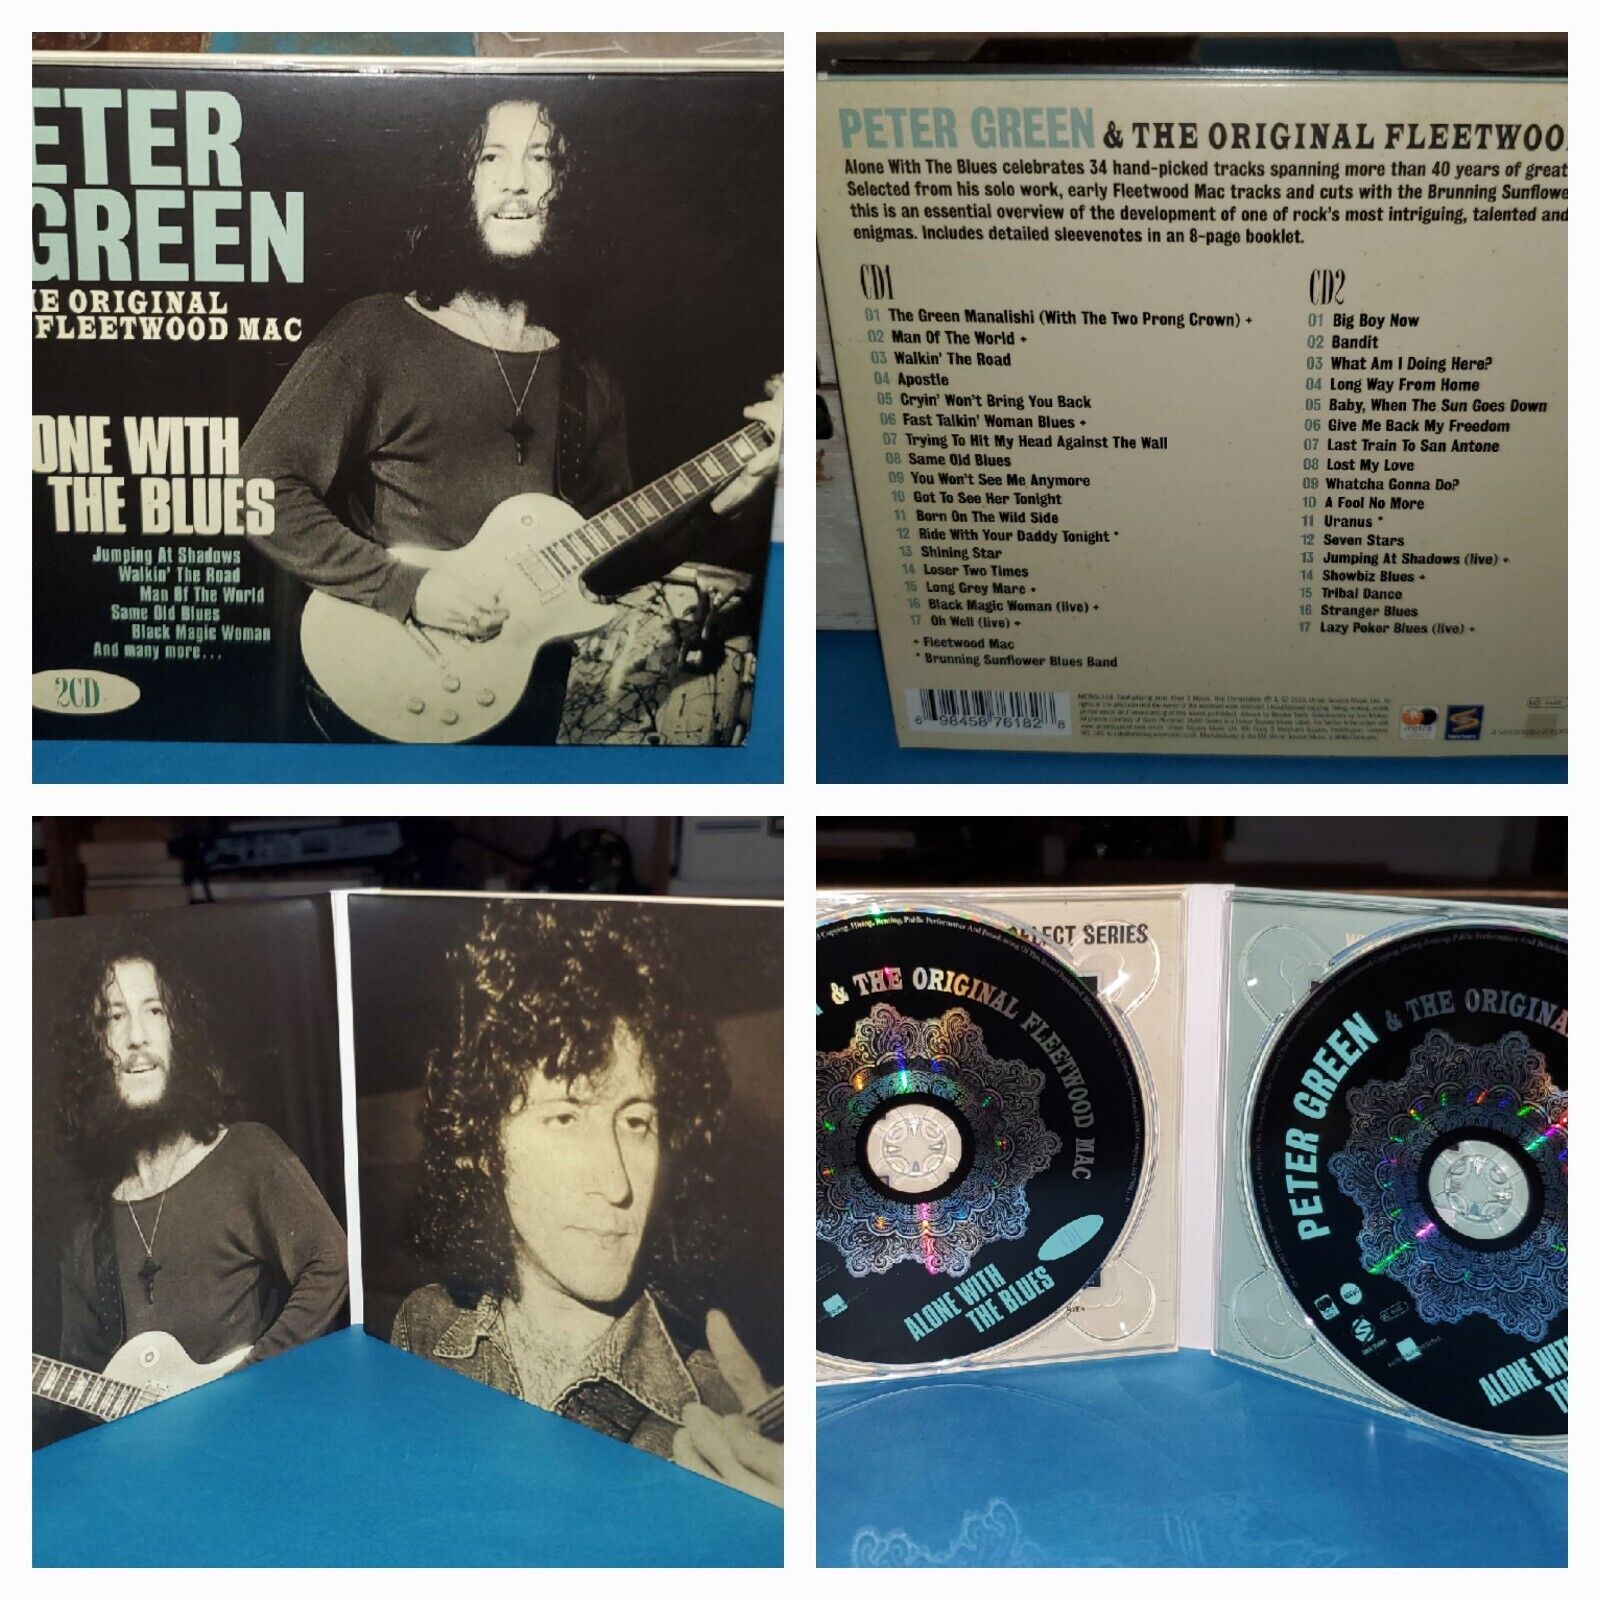 PETER GREEN 2 CD WITH FLEETWOOD MAC ALONE WITH THE BLUES ANTHOLOGY BOB BRUNNING 